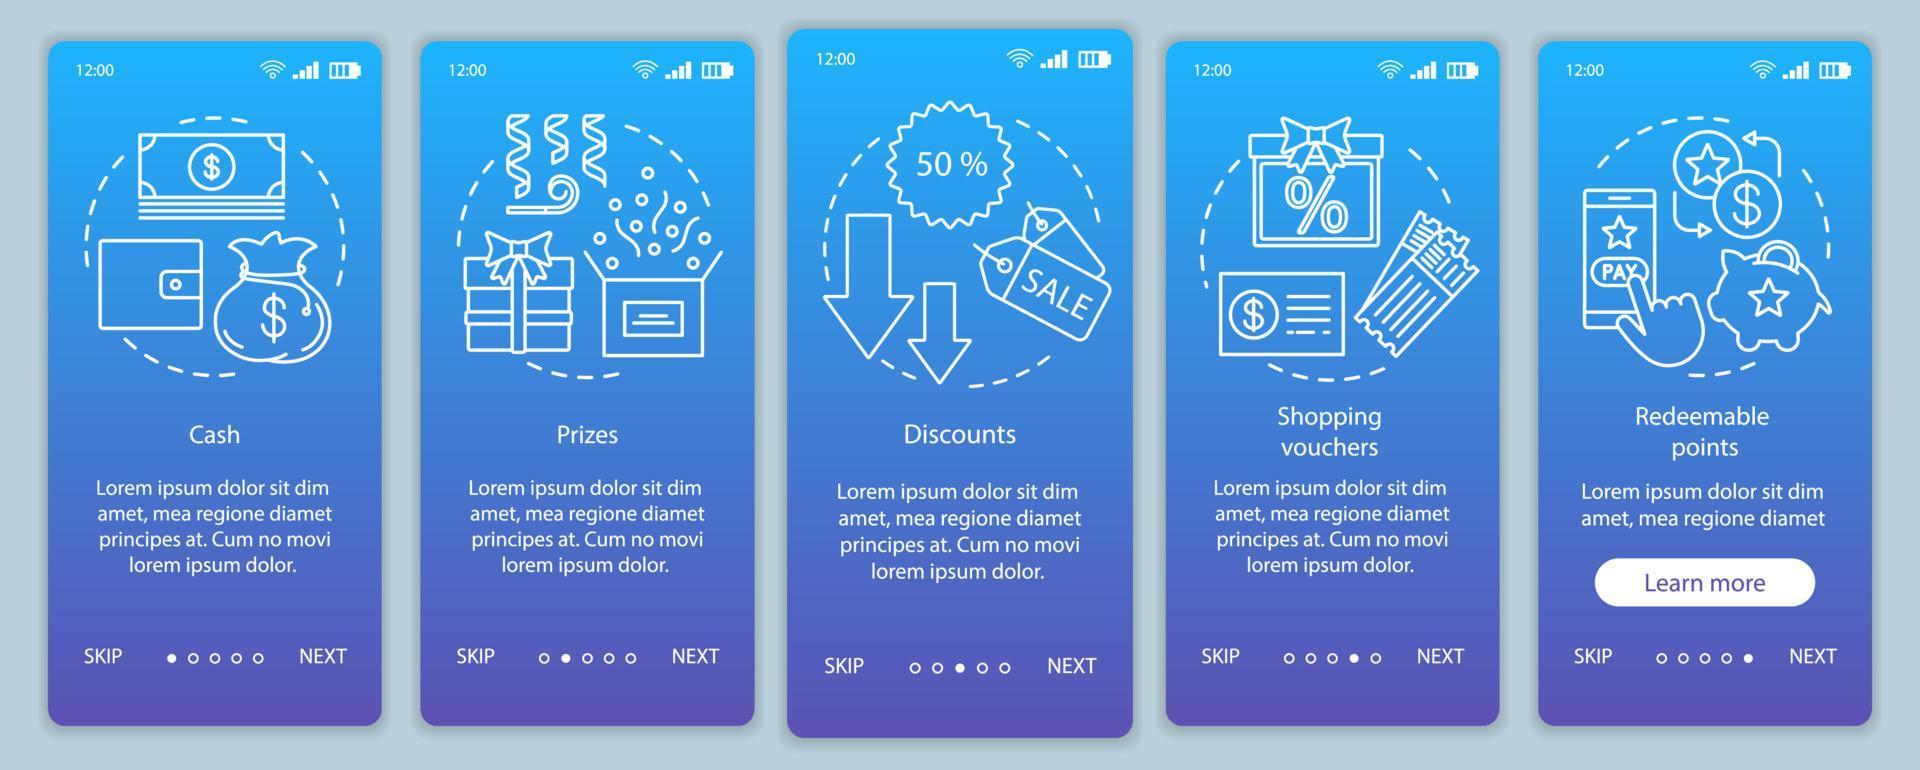 Referral rewards onboarding mobile app page screen with linear concepts. Walkthrough steps graphic instructions. Cash, prizes, discounts. UX, UI, GUI vector template with illustrations